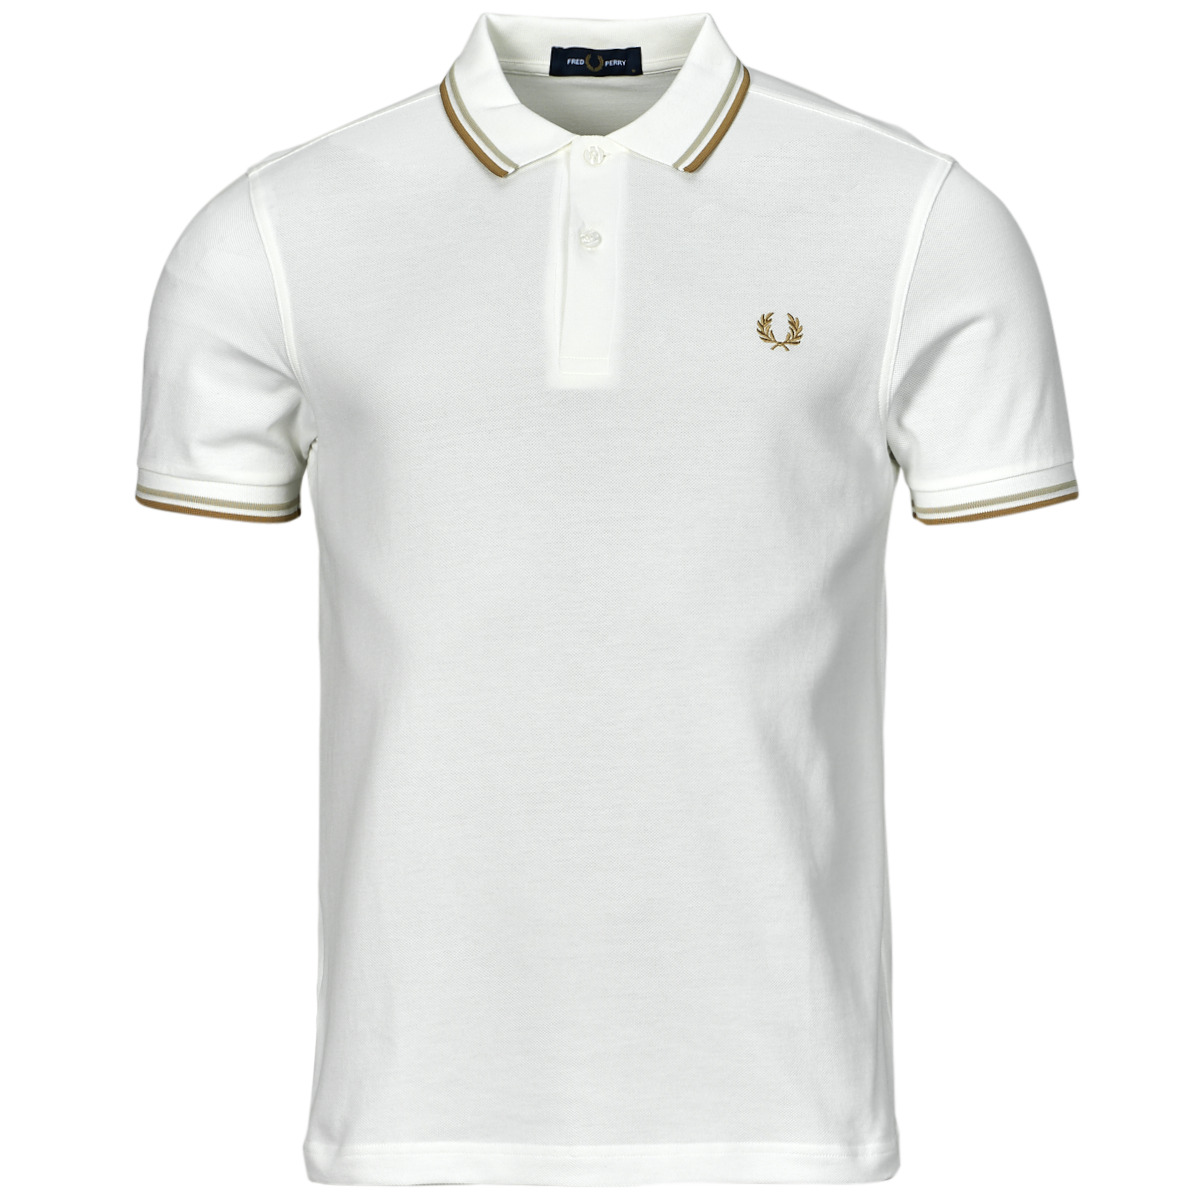 Vêtements Homme Polos manches courtes Fred Perry TWIN TIPPED FRED PERRY SHIRT Blanc / Beige